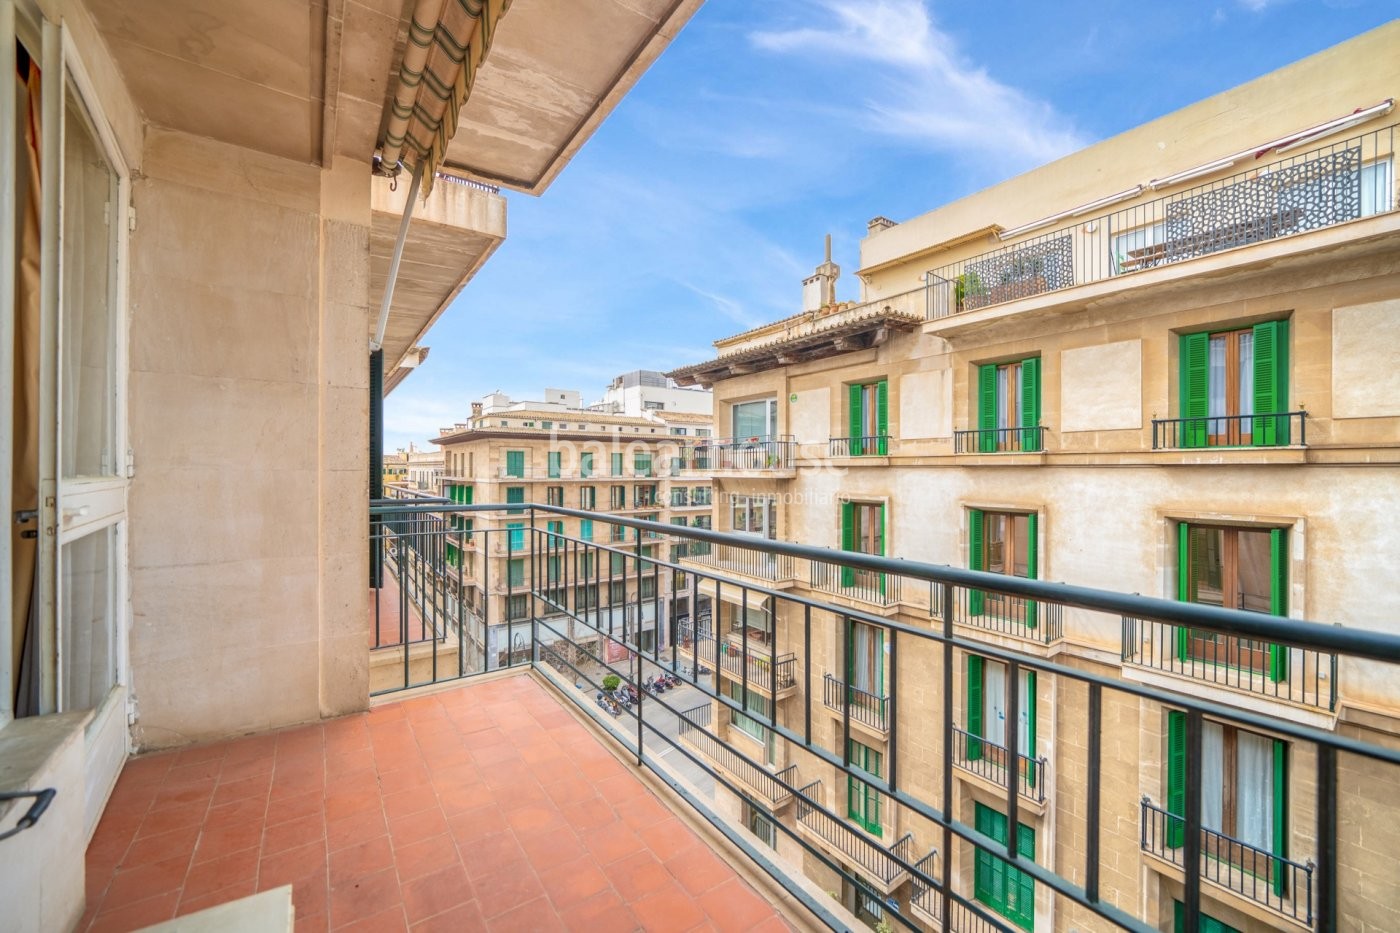 Excellent flat full of light and with a privileged location in the Jaime III avenue in Palma.